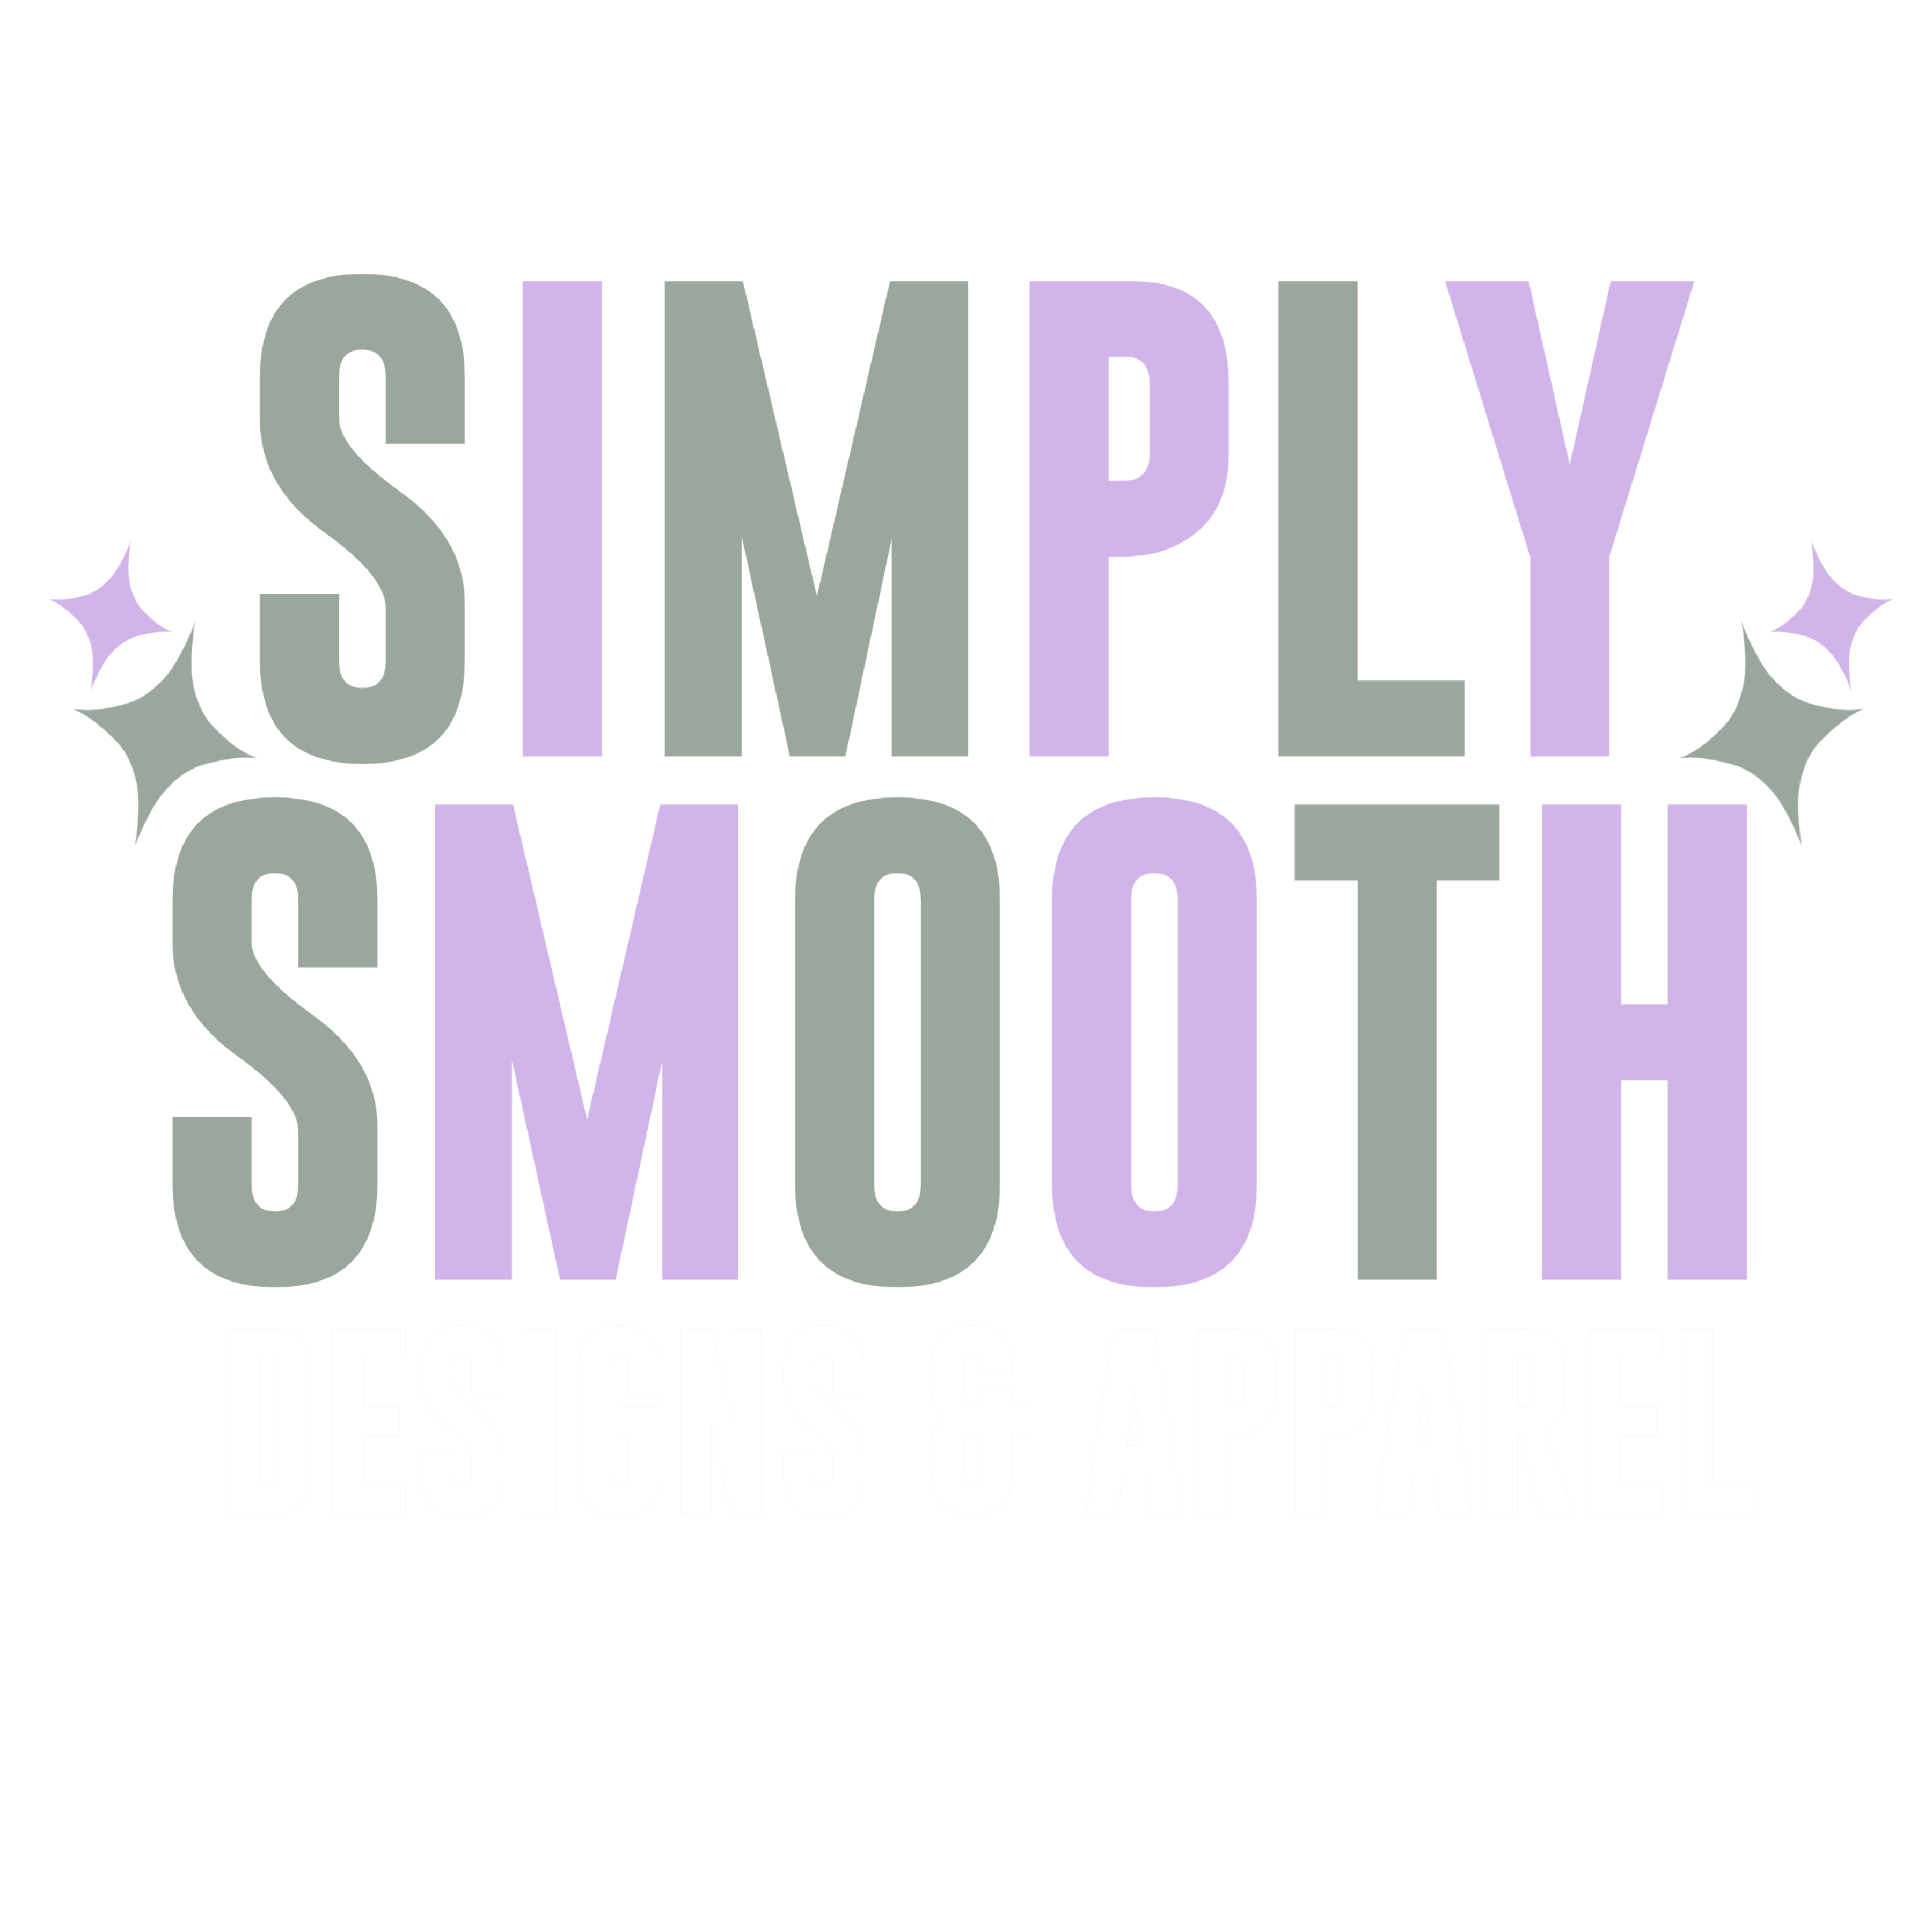 Simply Smooth Designs